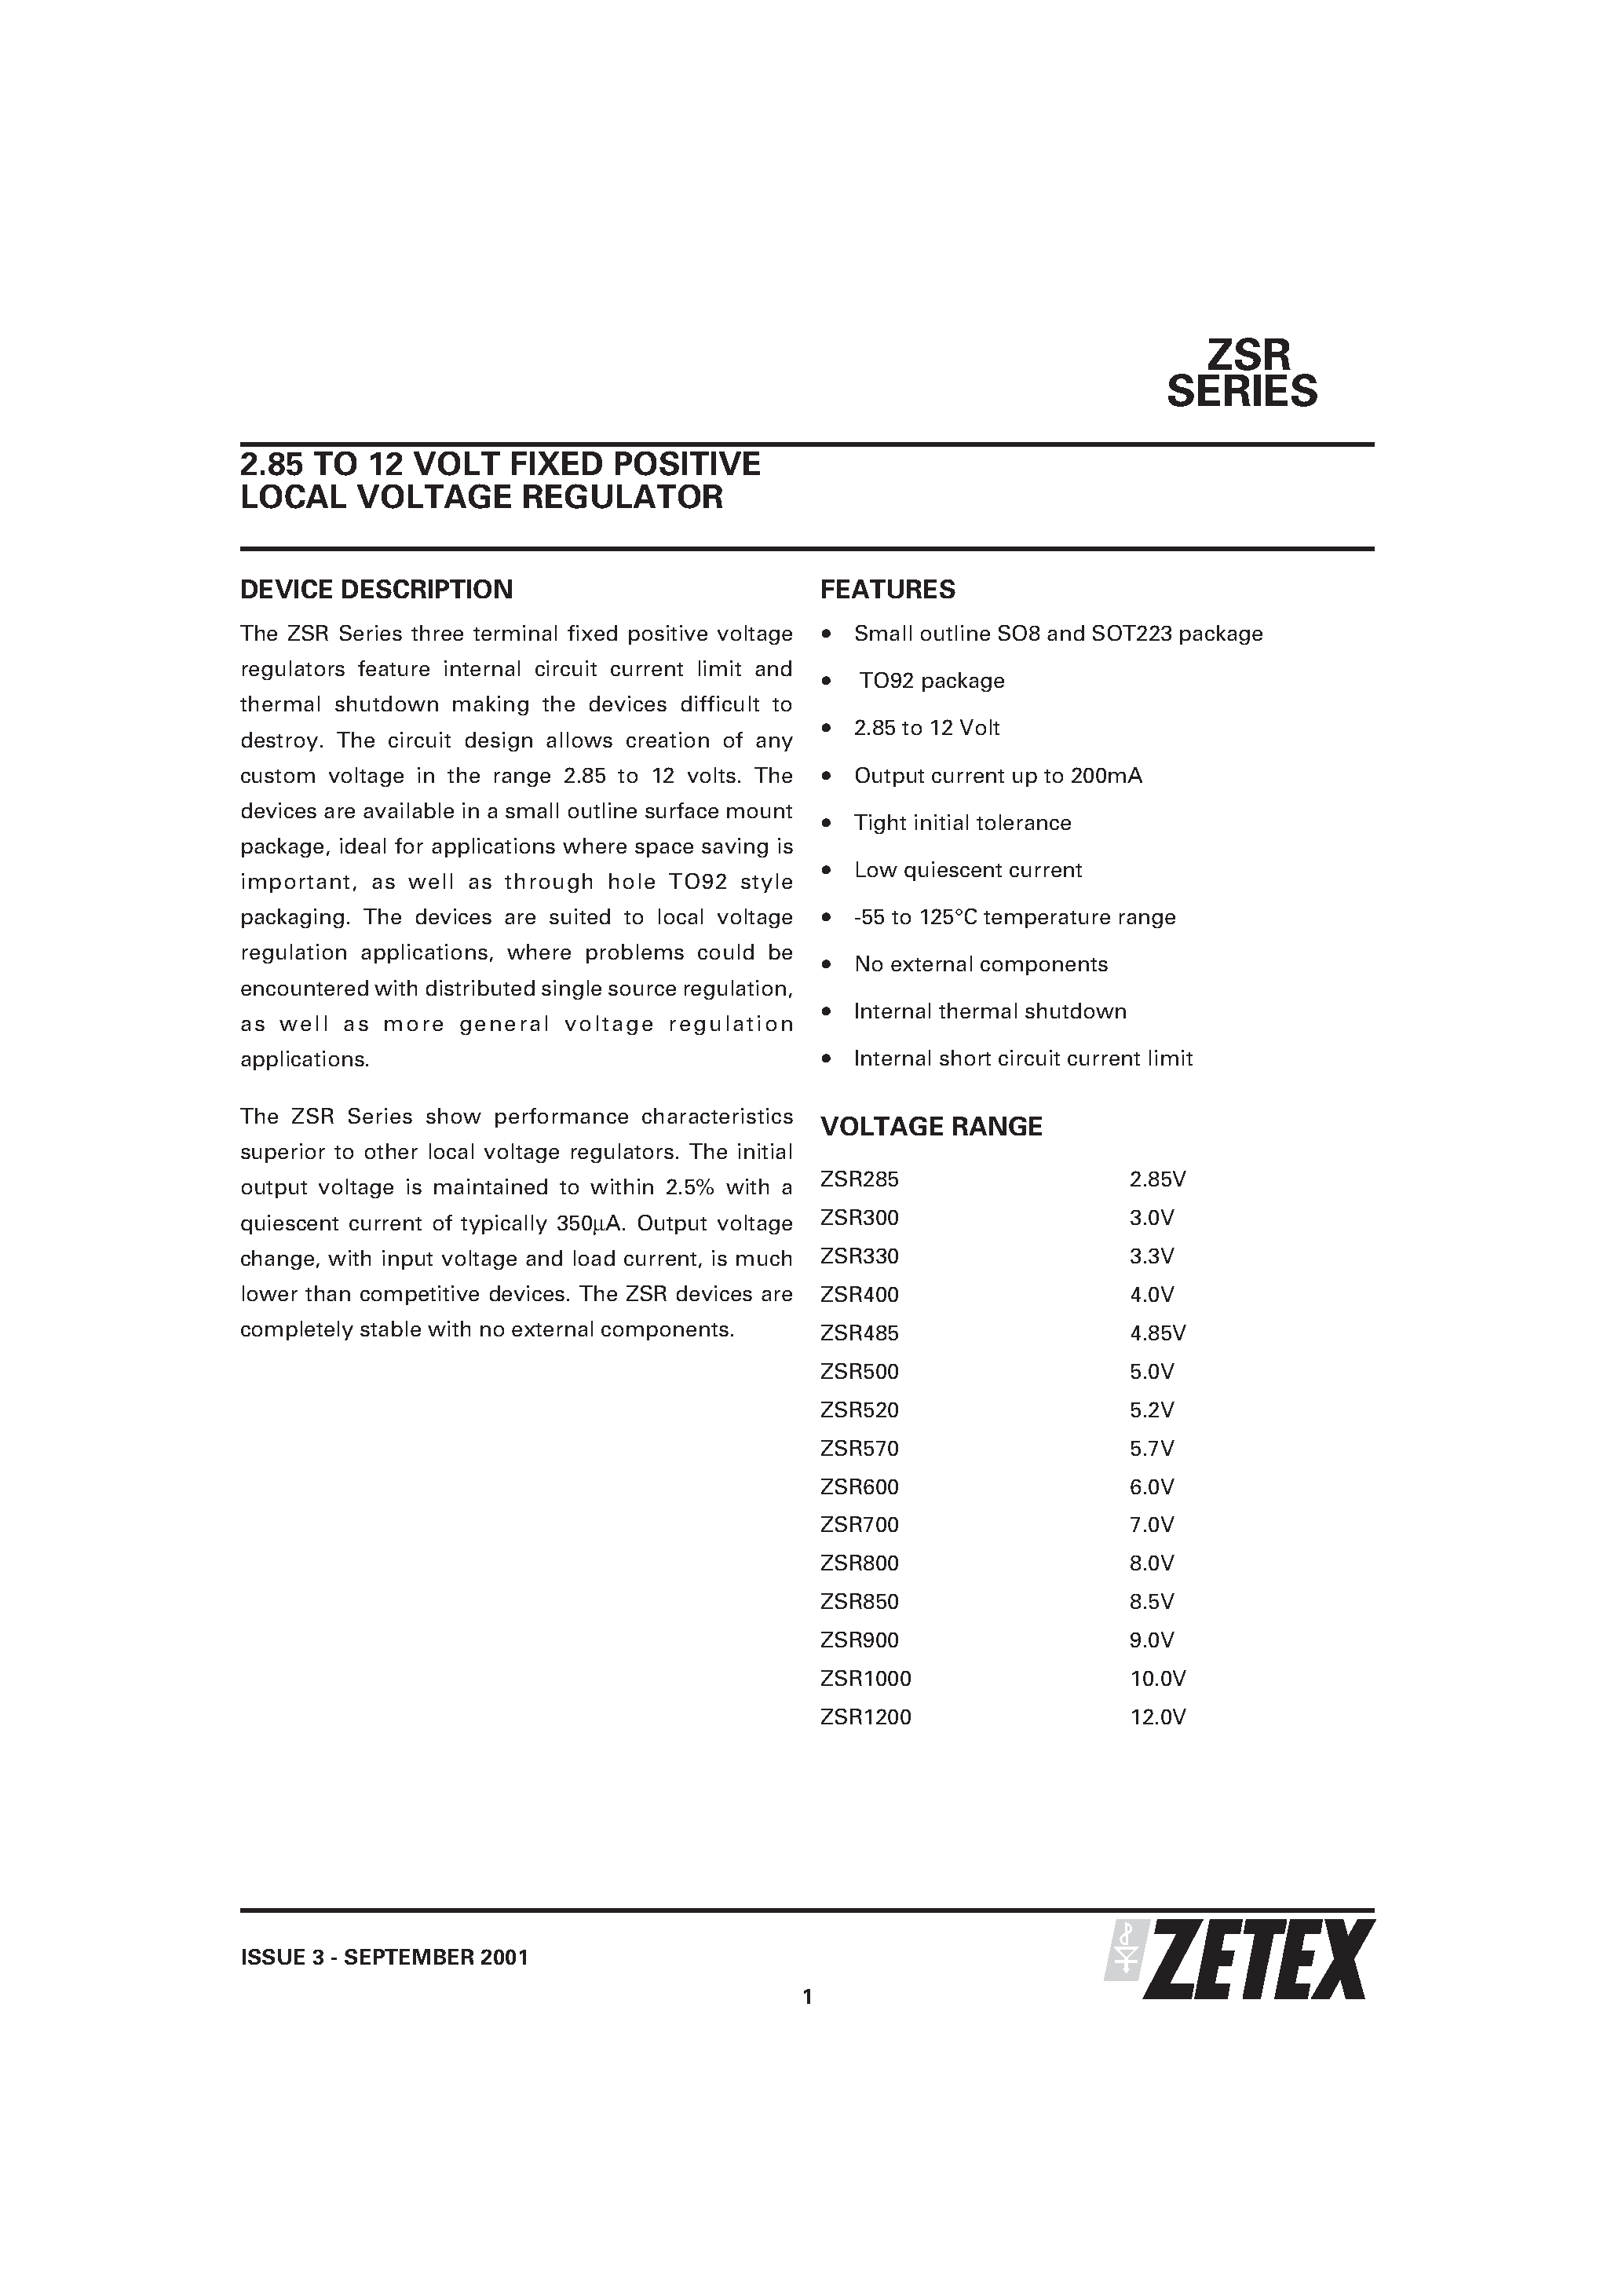 Datasheet ZSR - 2.85 TO 12 VOLT FIXED POSITIVE LOCAL VOLTAGE REGULATOR page 1